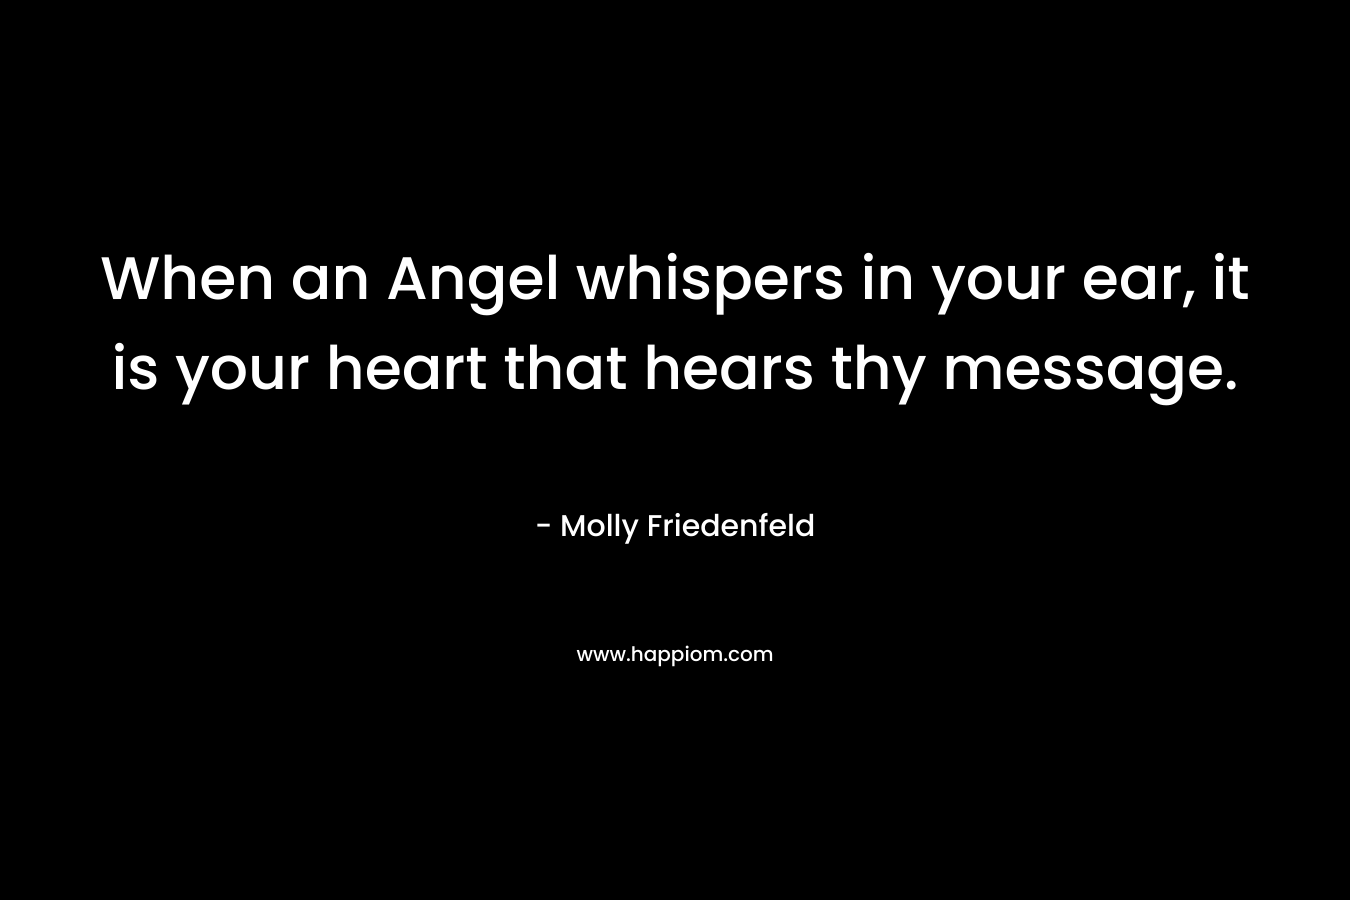 When an Angel whispers in your ear, it is your heart that hears thy message. – Molly Friedenfeld